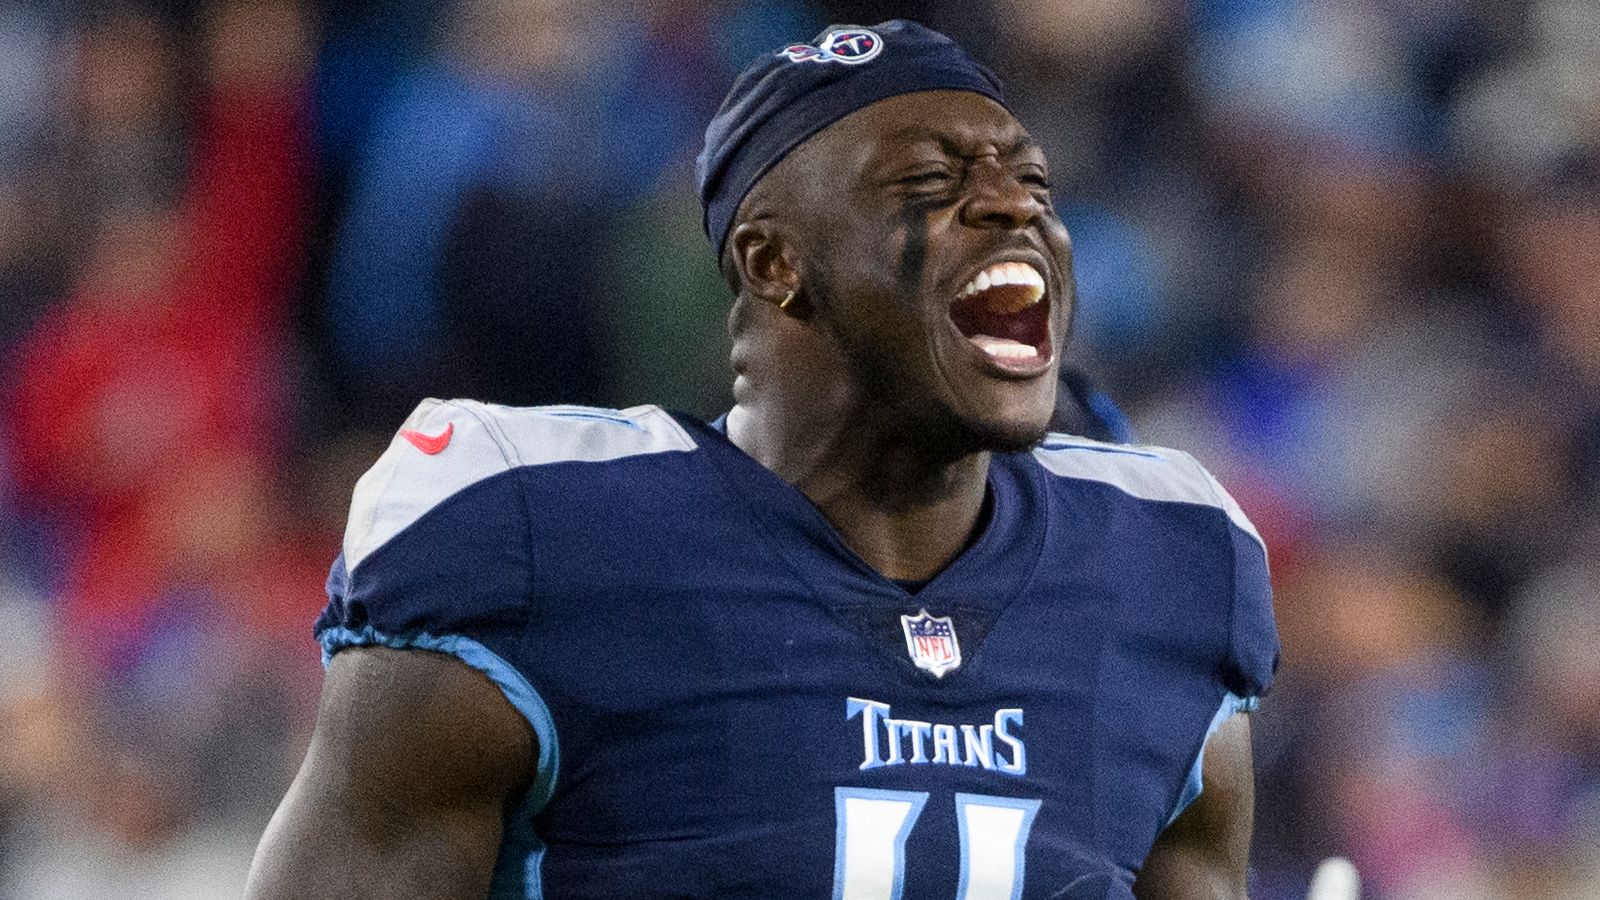 Titans trade Brown to Eagles to move up to 18, draft Burks